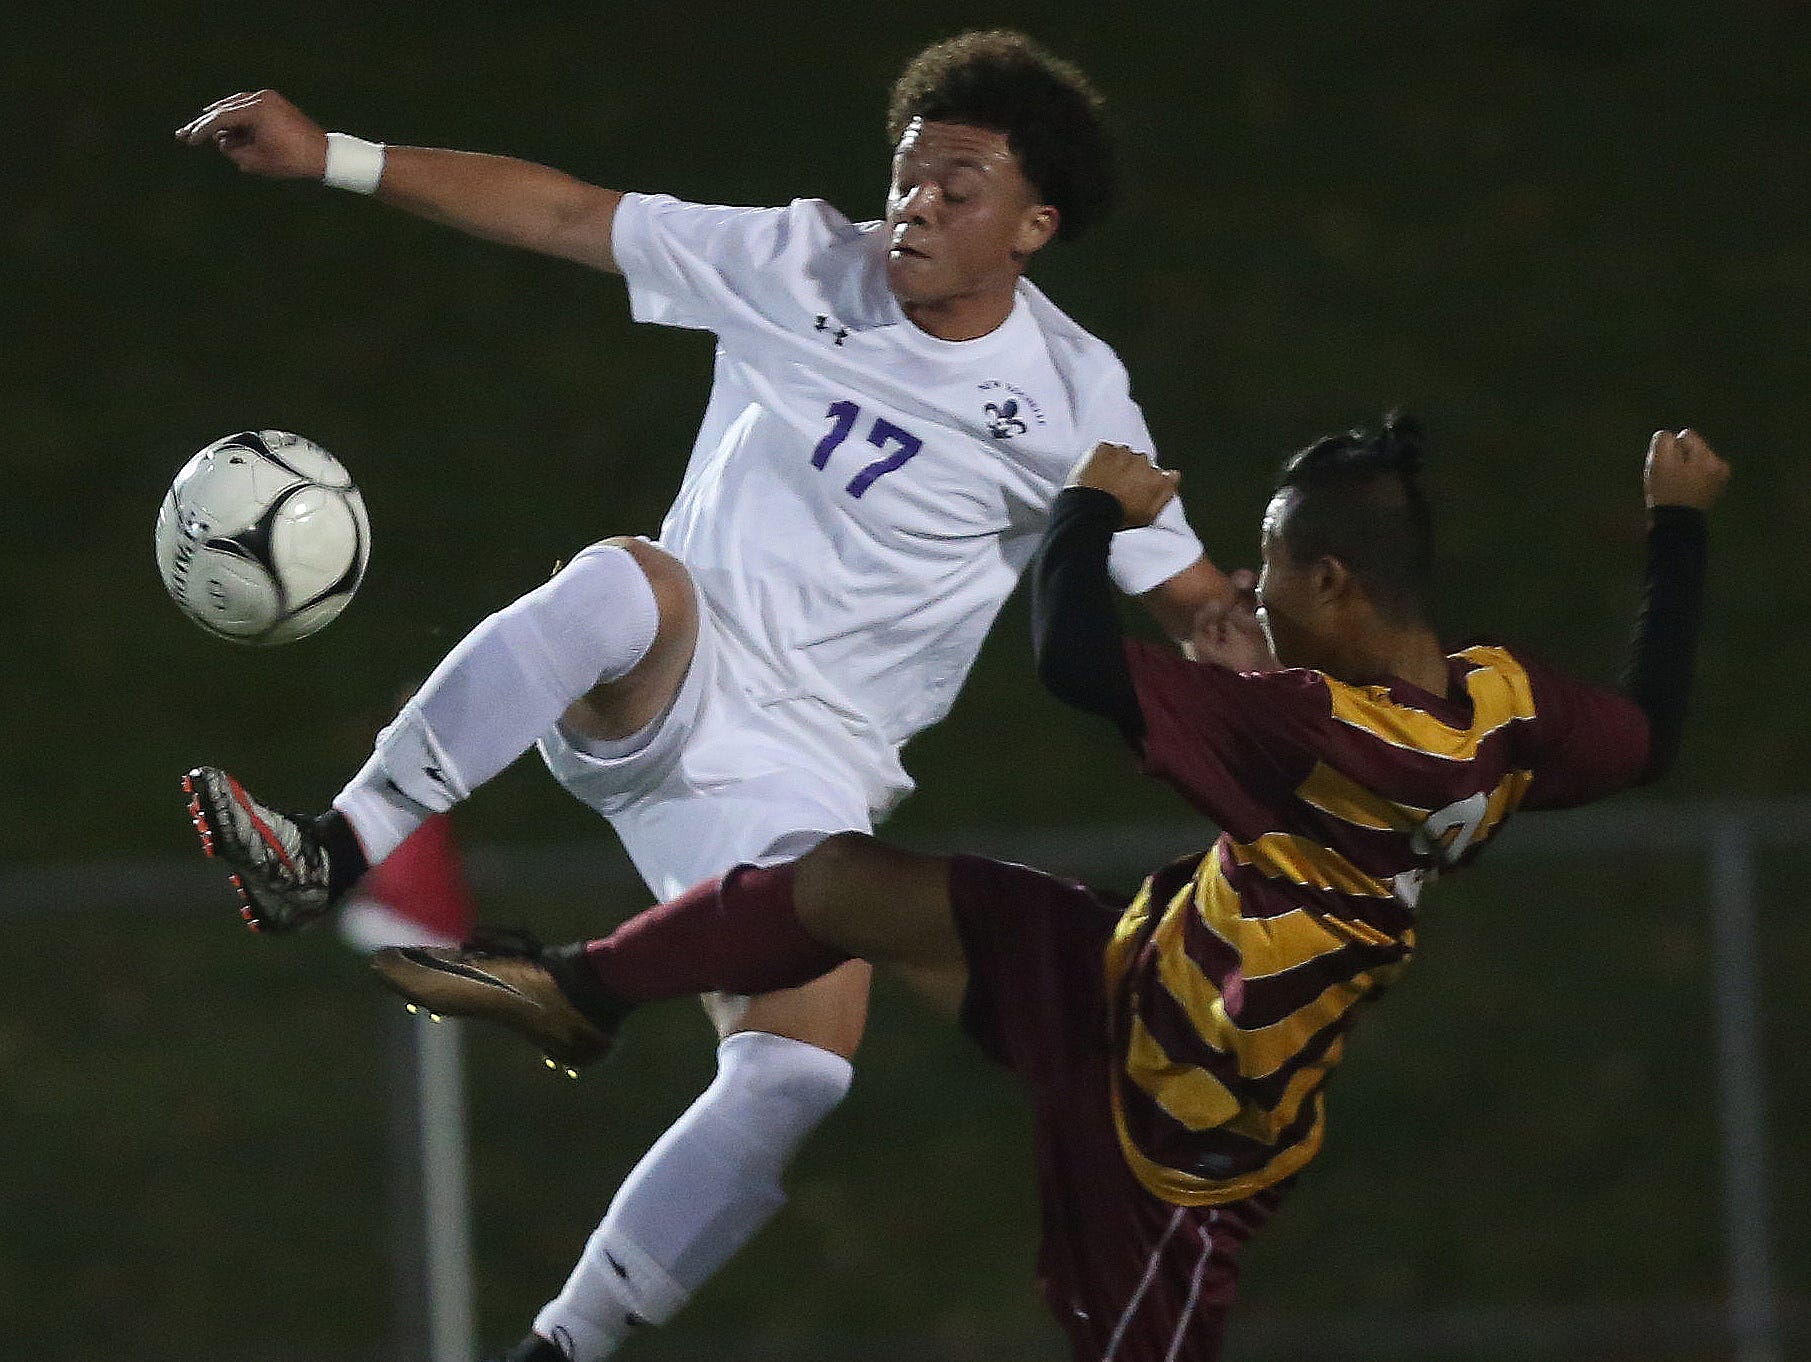 From left, New Rochelle's David Lopez (17) kicks the ball away from an Ithaca defender during the boys soccer regional semifinal at Lakeland High School in Shrub Oak Nov. 2, 2016.